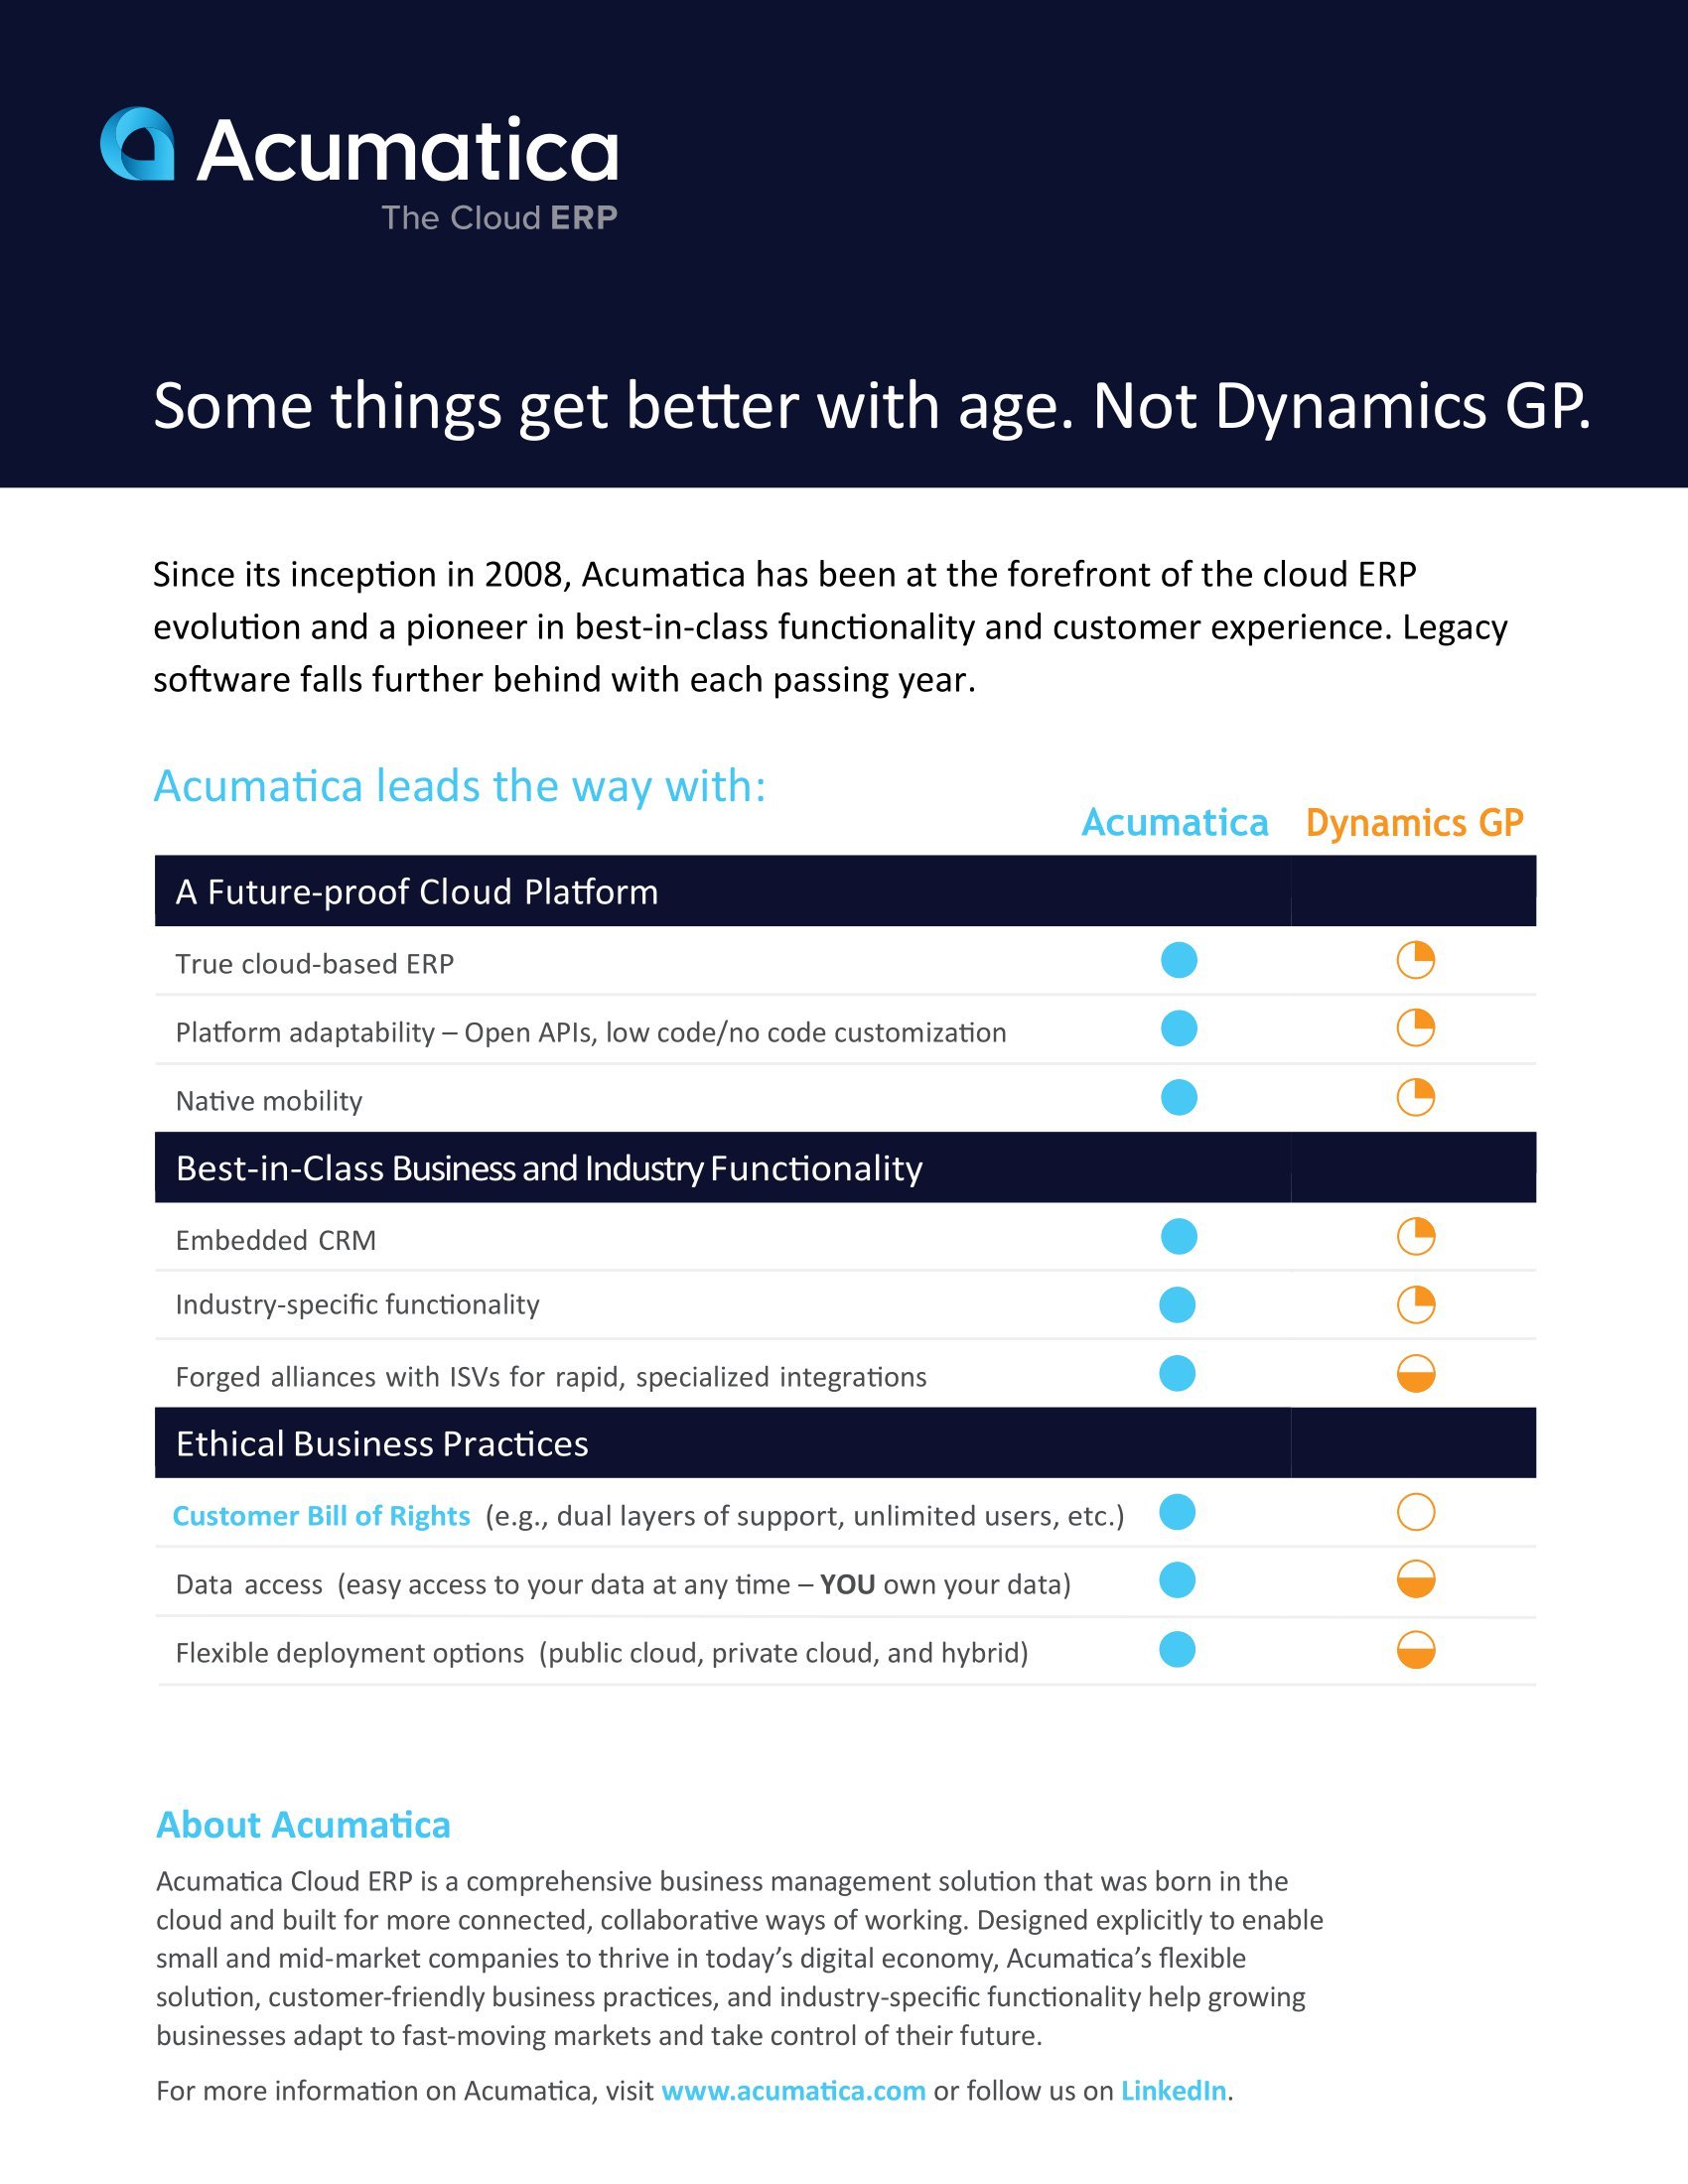 New Acumatica vs. Dynamics GP Infographic Reveals Which ERP Solution ‘Leads the Way’